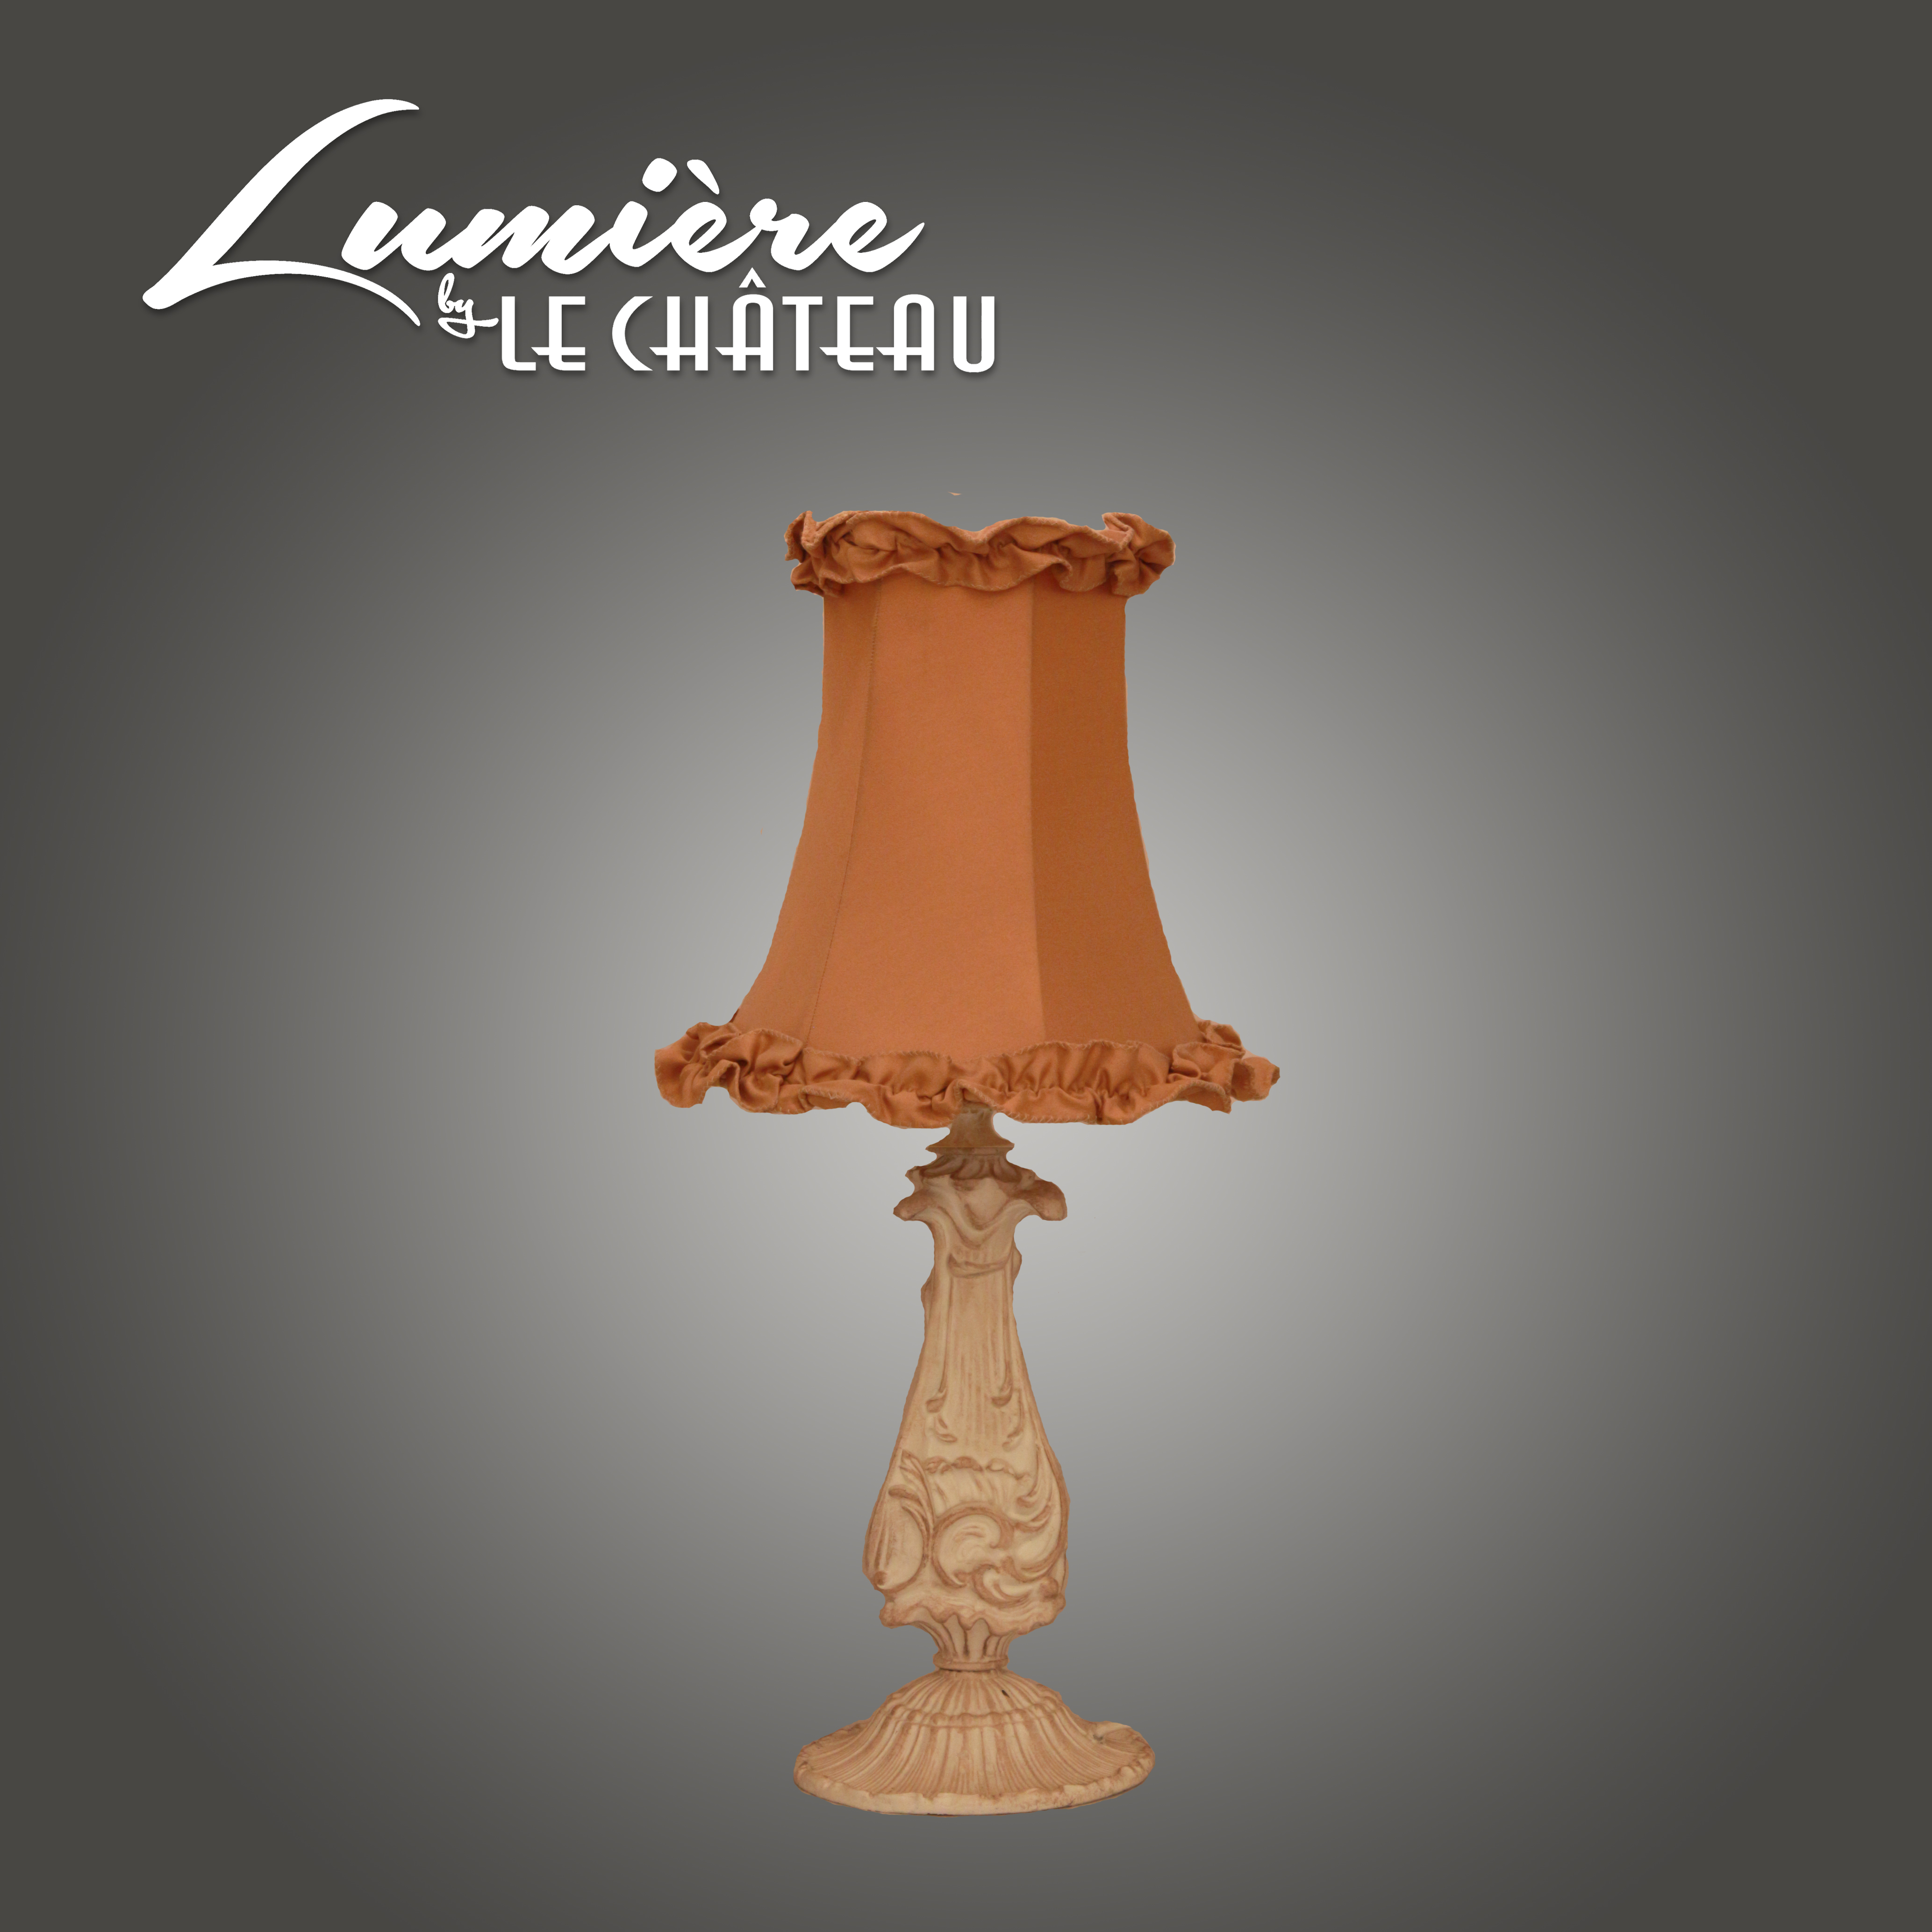 Table lamps Abj.32044